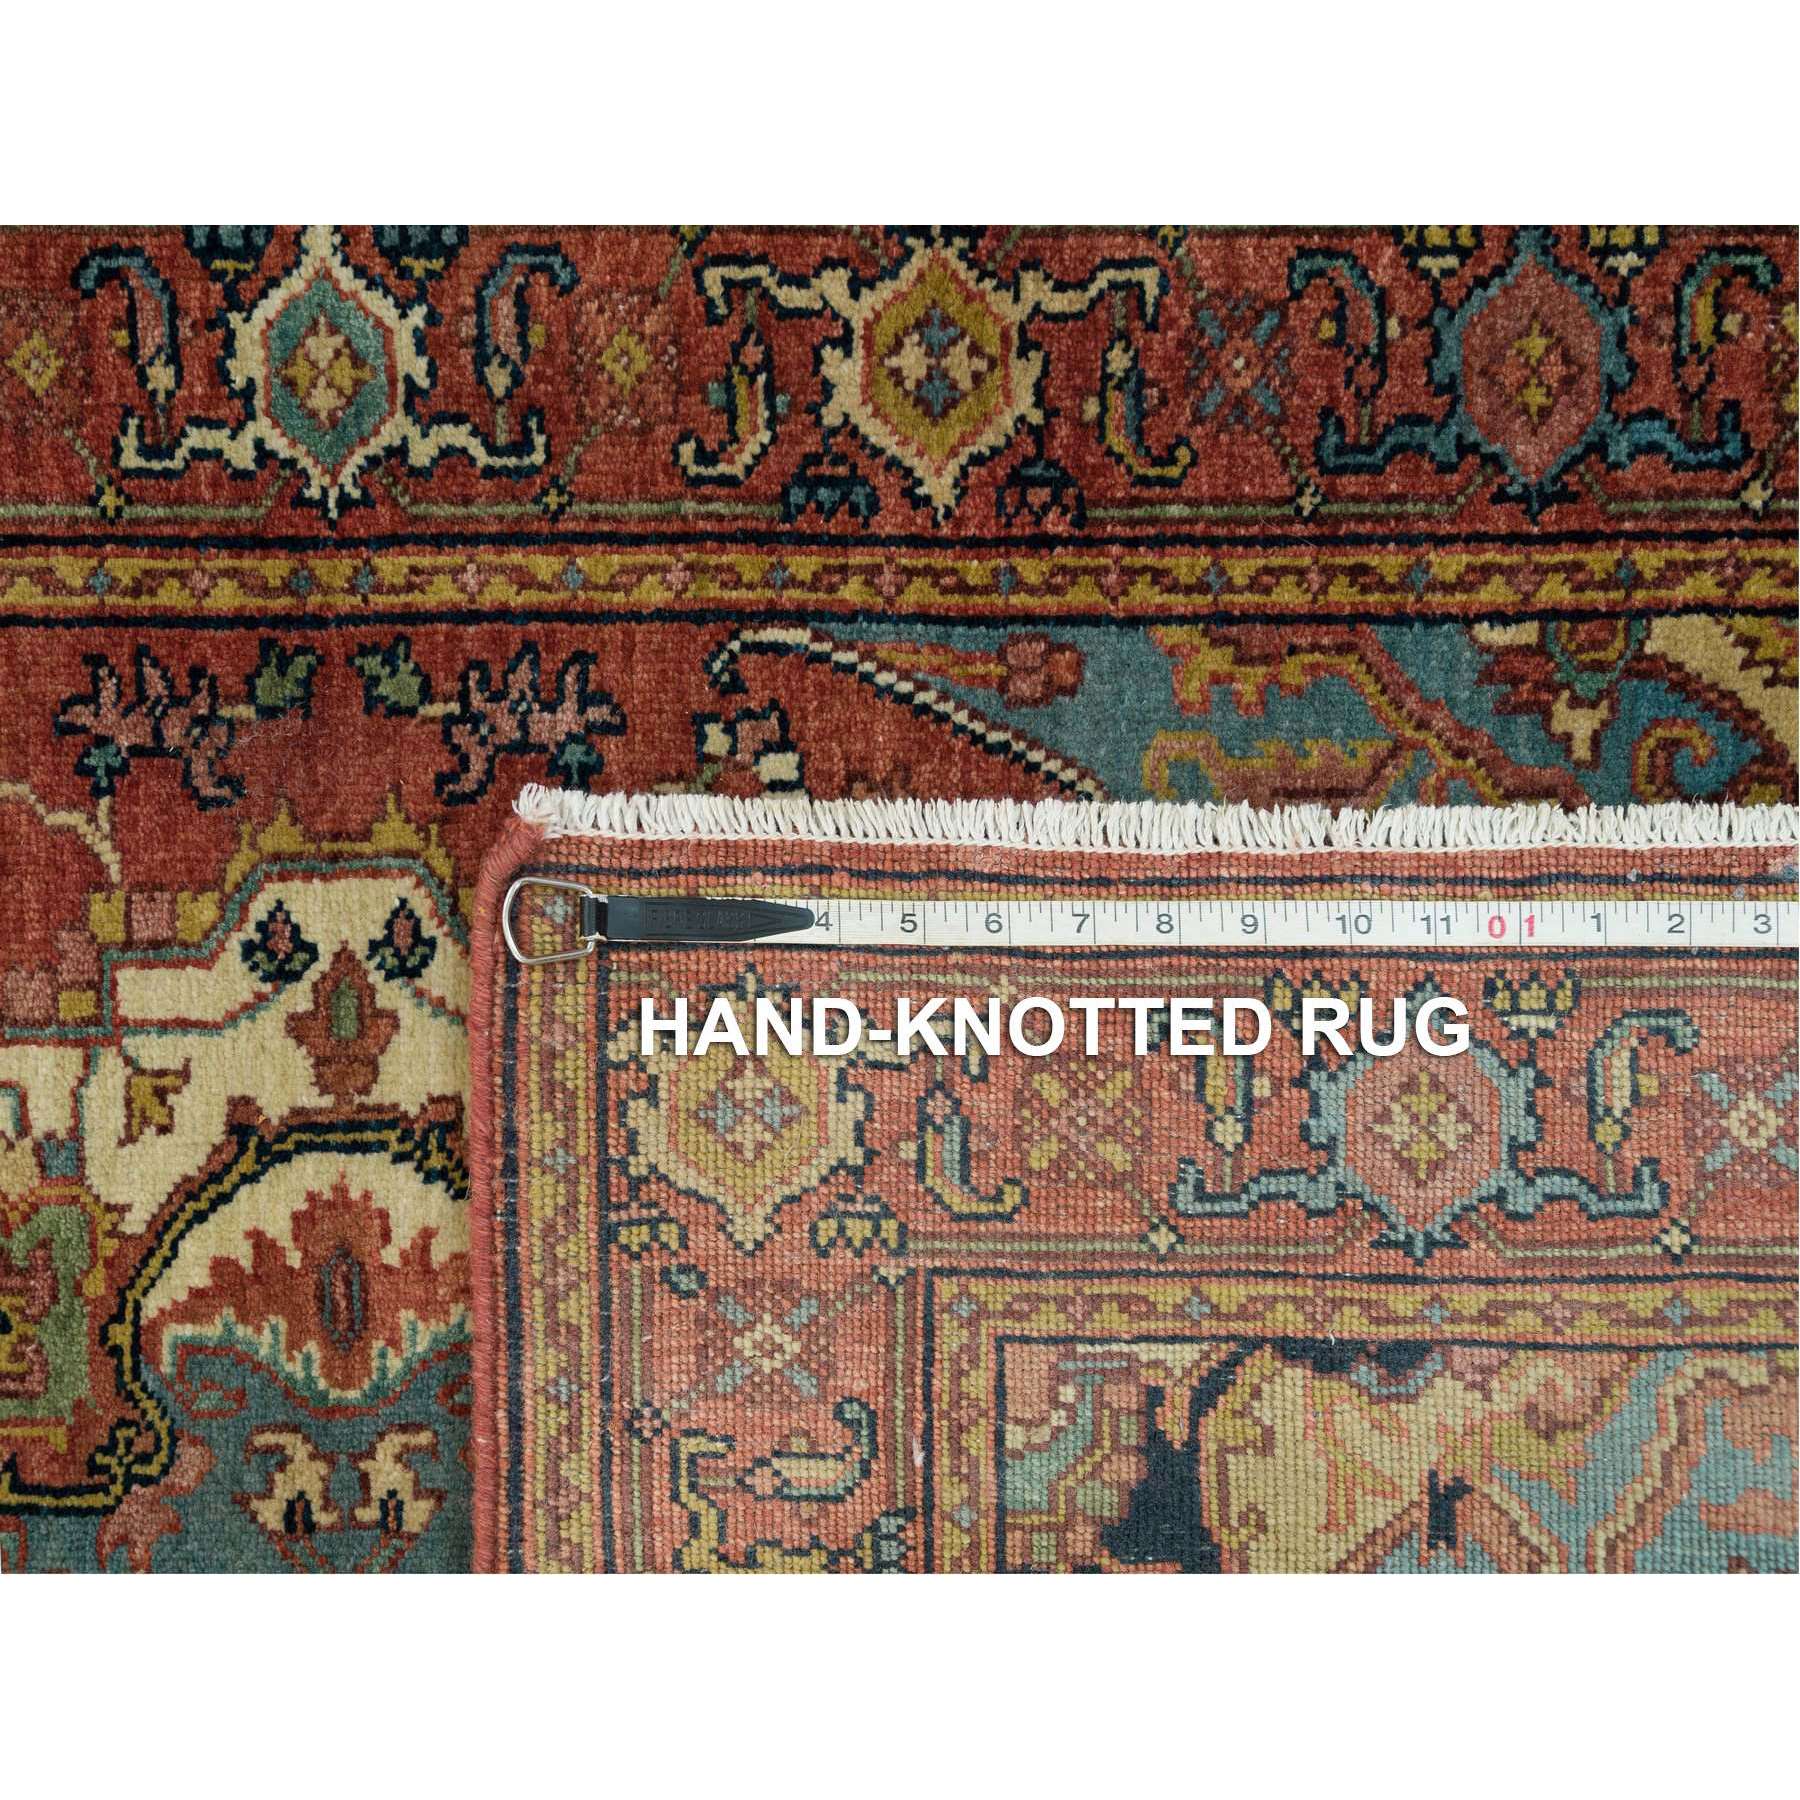 3'2"x5'1" Rust Red, Pure Wool, Lush Pile, Vegetable Dyes, Antiqued Fine Heriz Re-Creation, Hand Woven, Dense Weave, Oriental Rug 